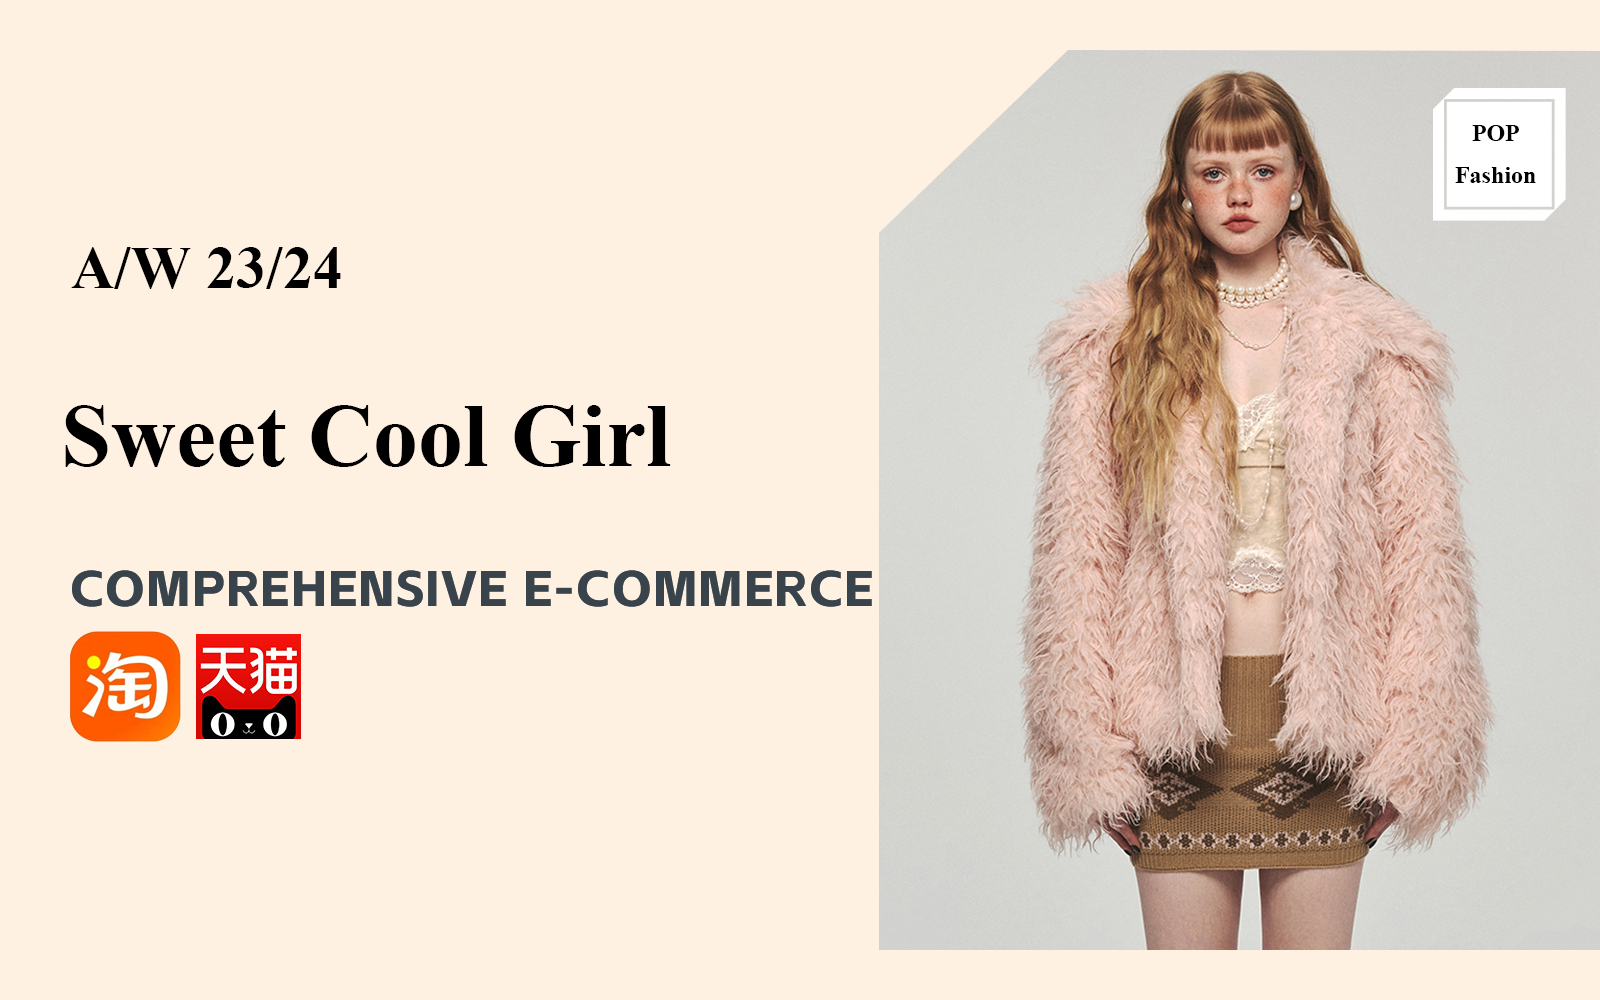 Sweet Cool Girl -- The Comprehensive Analysis of Womenswear E-commerce Brand